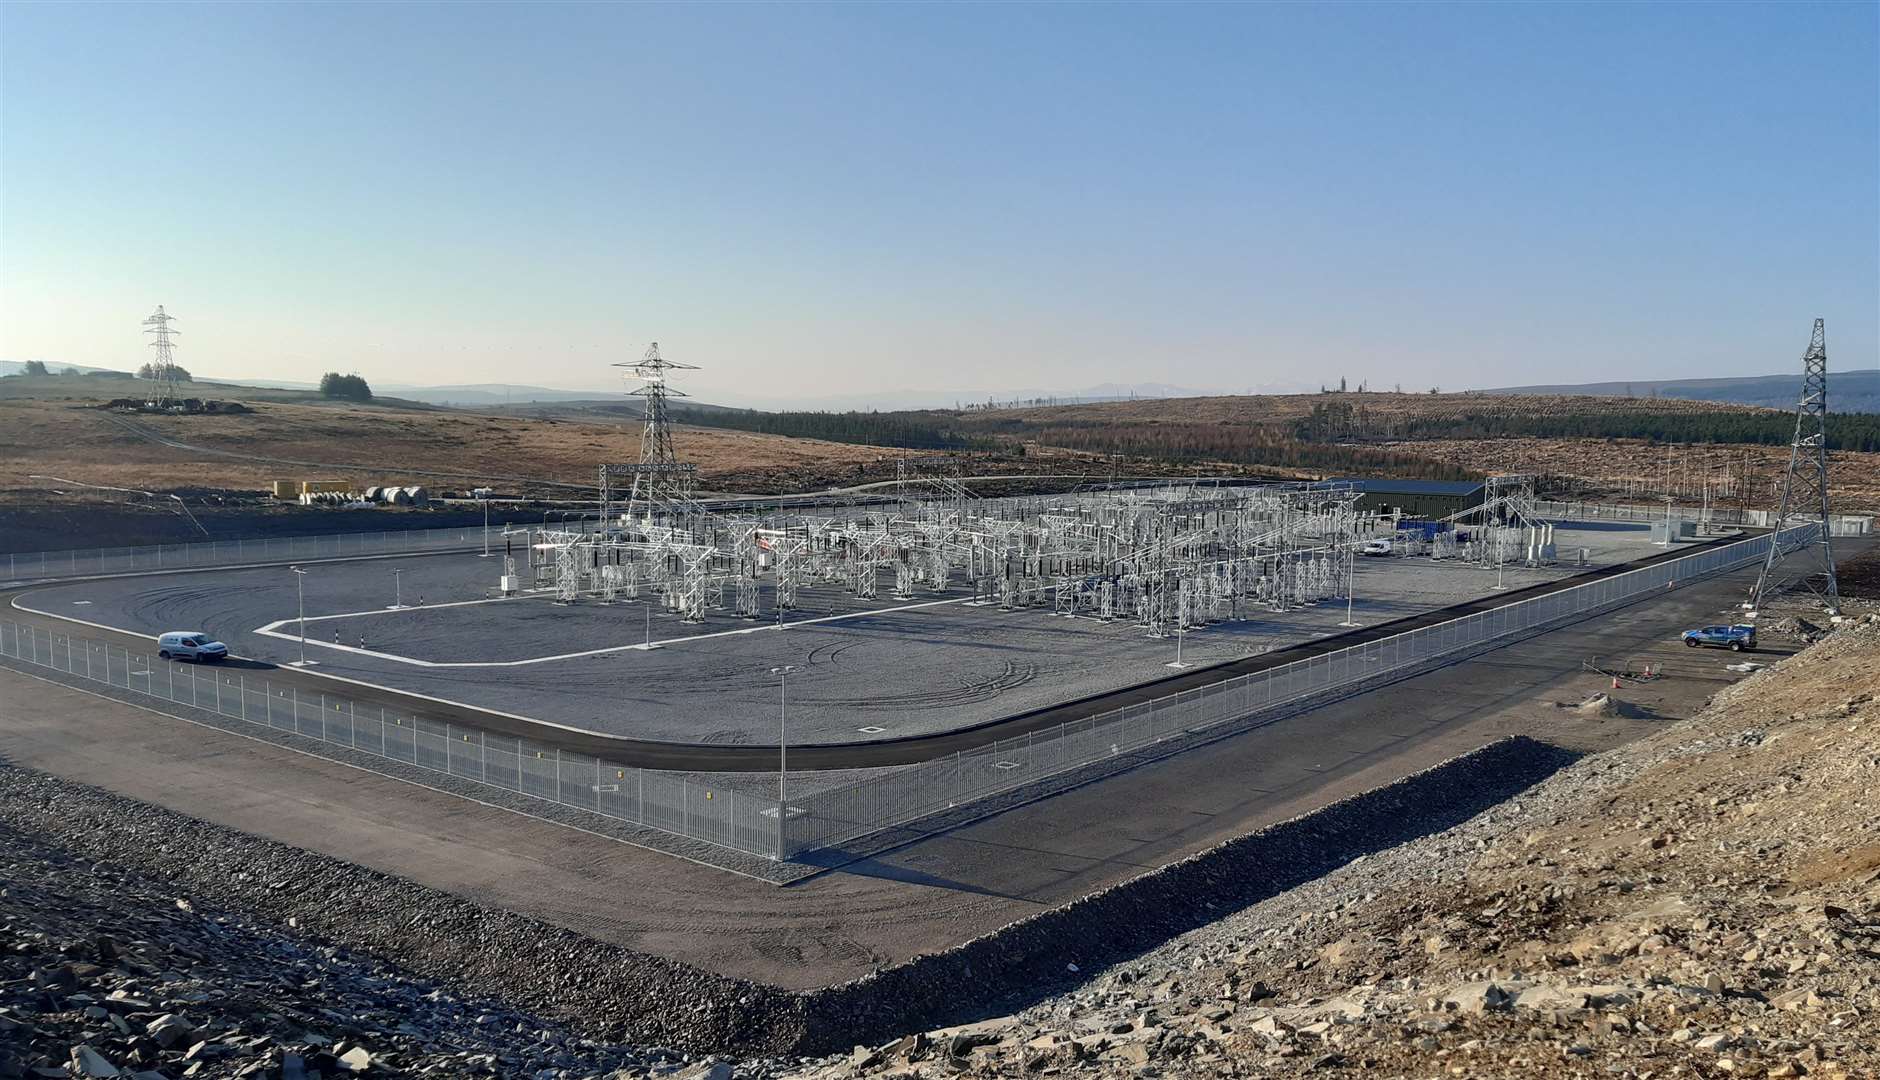 SSEN Transmission along with contractors Balfour Beatty and Wood Group have been working to construct the new Dalchork Substation, 3km south of Lairg, since 2019.